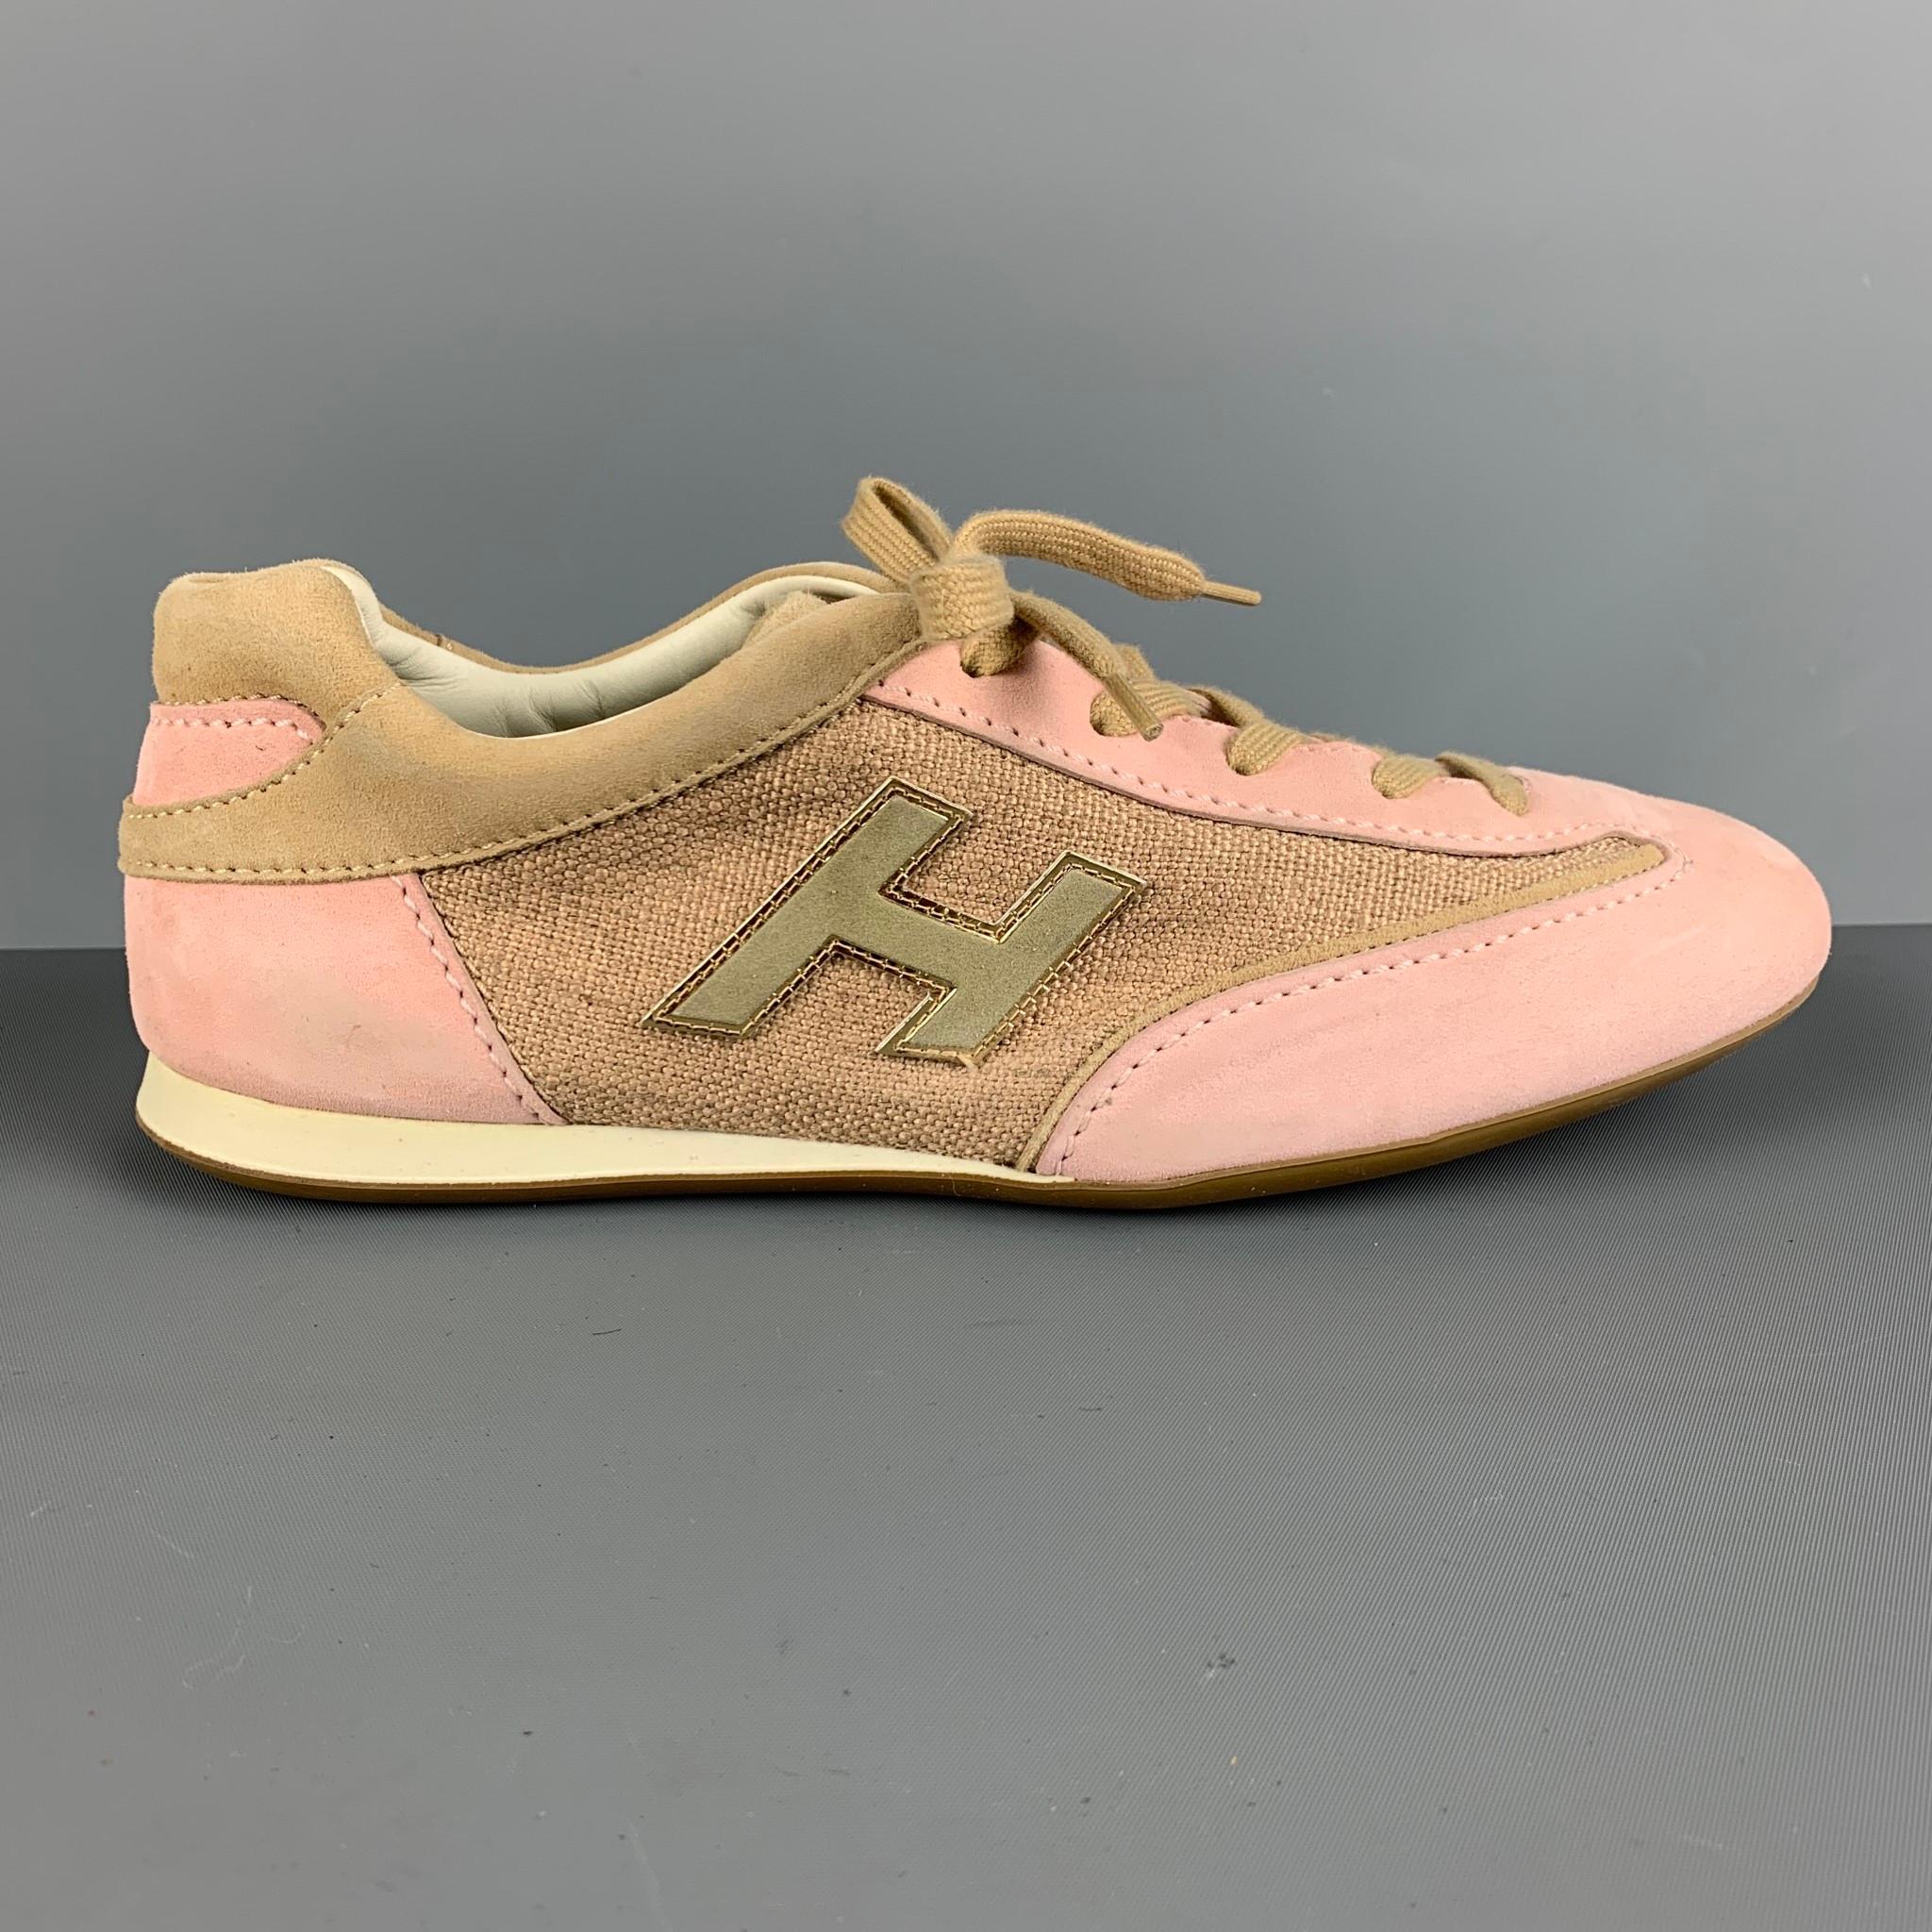 HOGAN OLYMPIA sneakers comes in a beige and pink suede featuring a low top style, rubber sole and a lace up closure.

Very Good Pre-Owned Condition. Moderate wear.
Marked: 8

Outsole: 10.5 in. x 3.25 in.  

SKU: 117839
Category: Sneakers

More